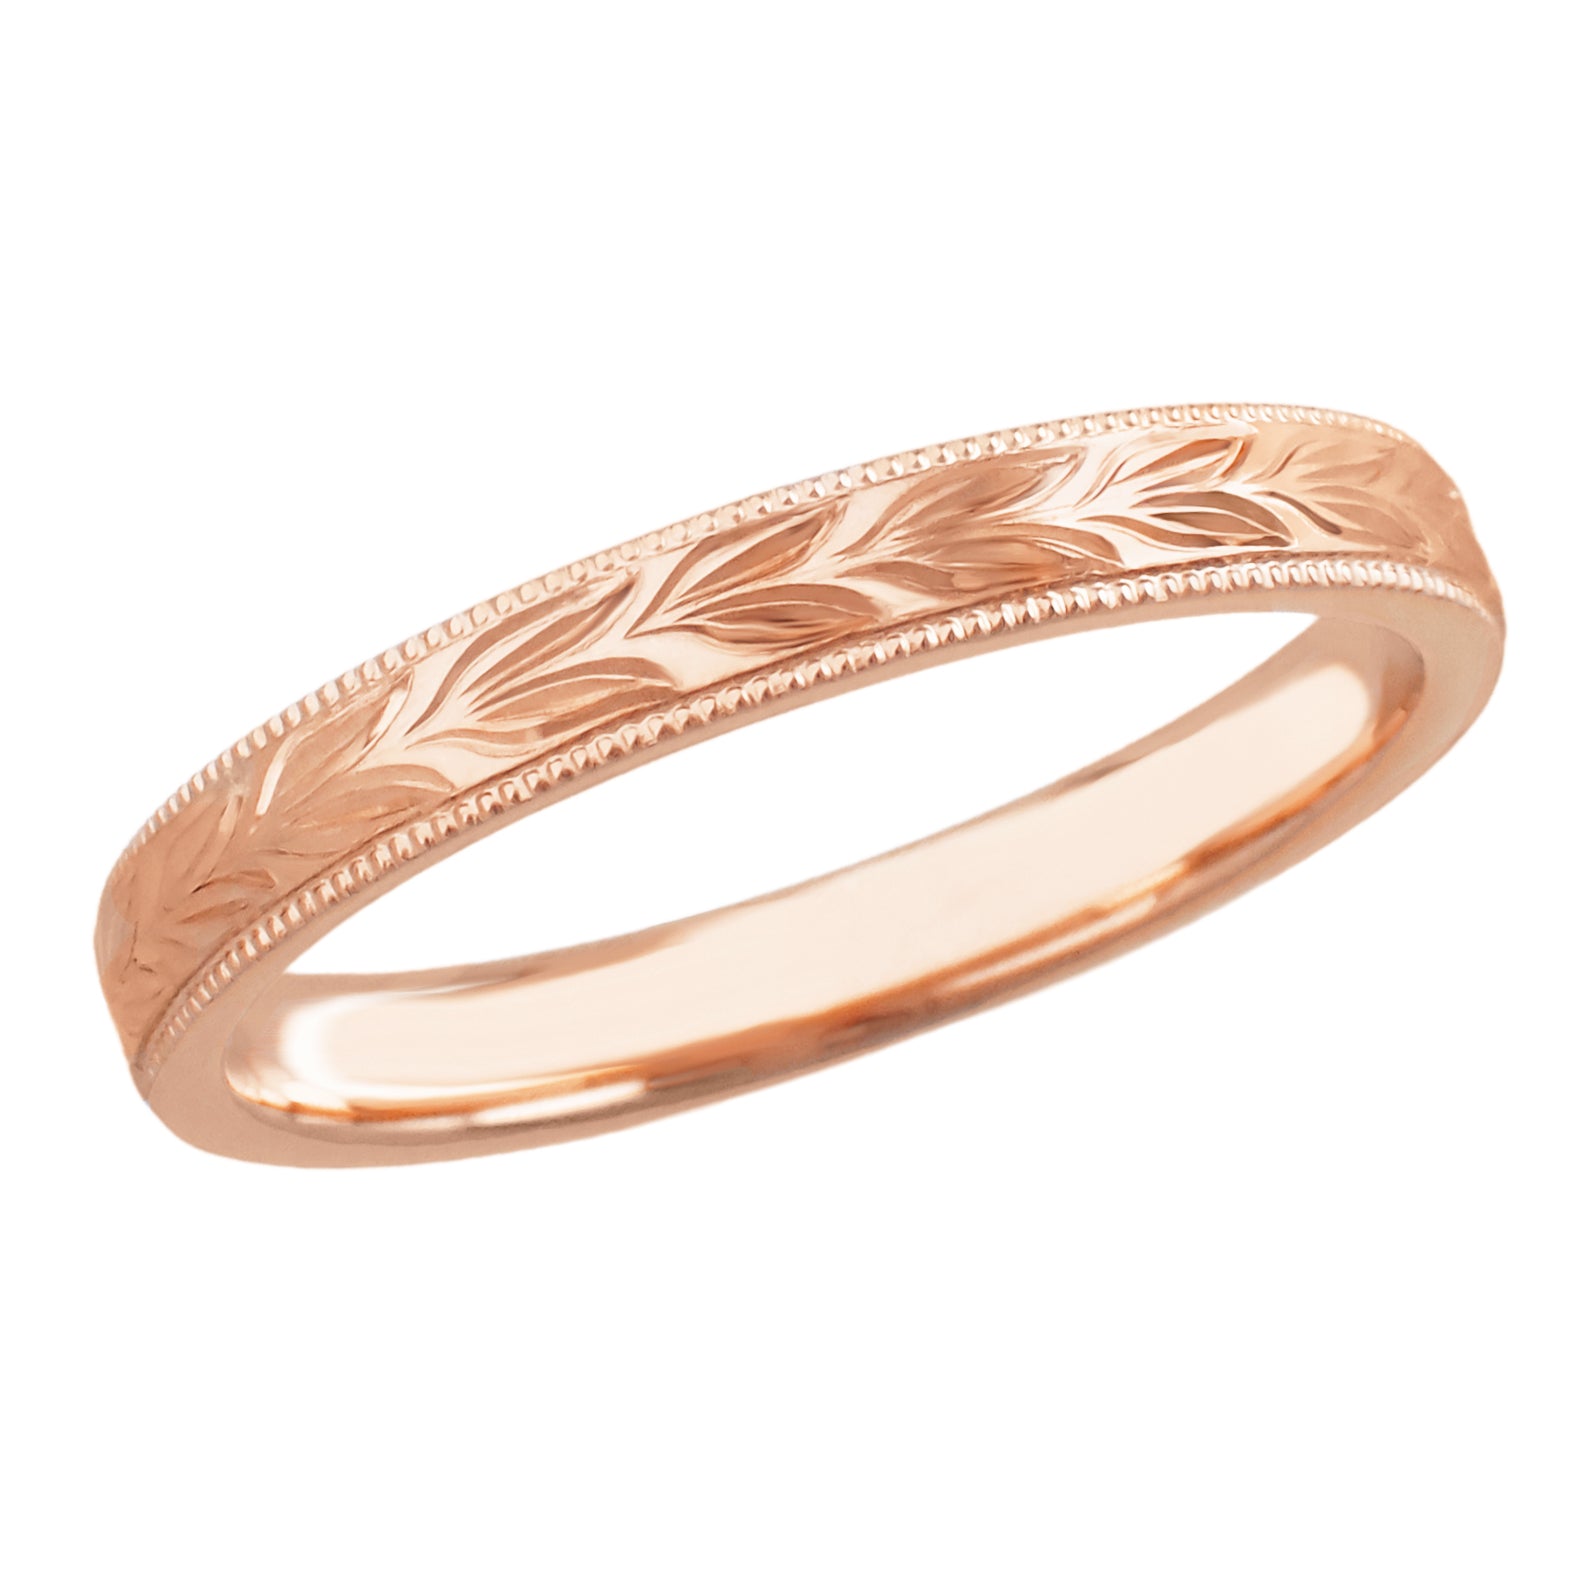 Antique Style Hand Engraved Hawaiian Maile Leaves Wedding Band in 14 Karat Rose Gold - 3mm Wide - Item: R719R - Image: 4